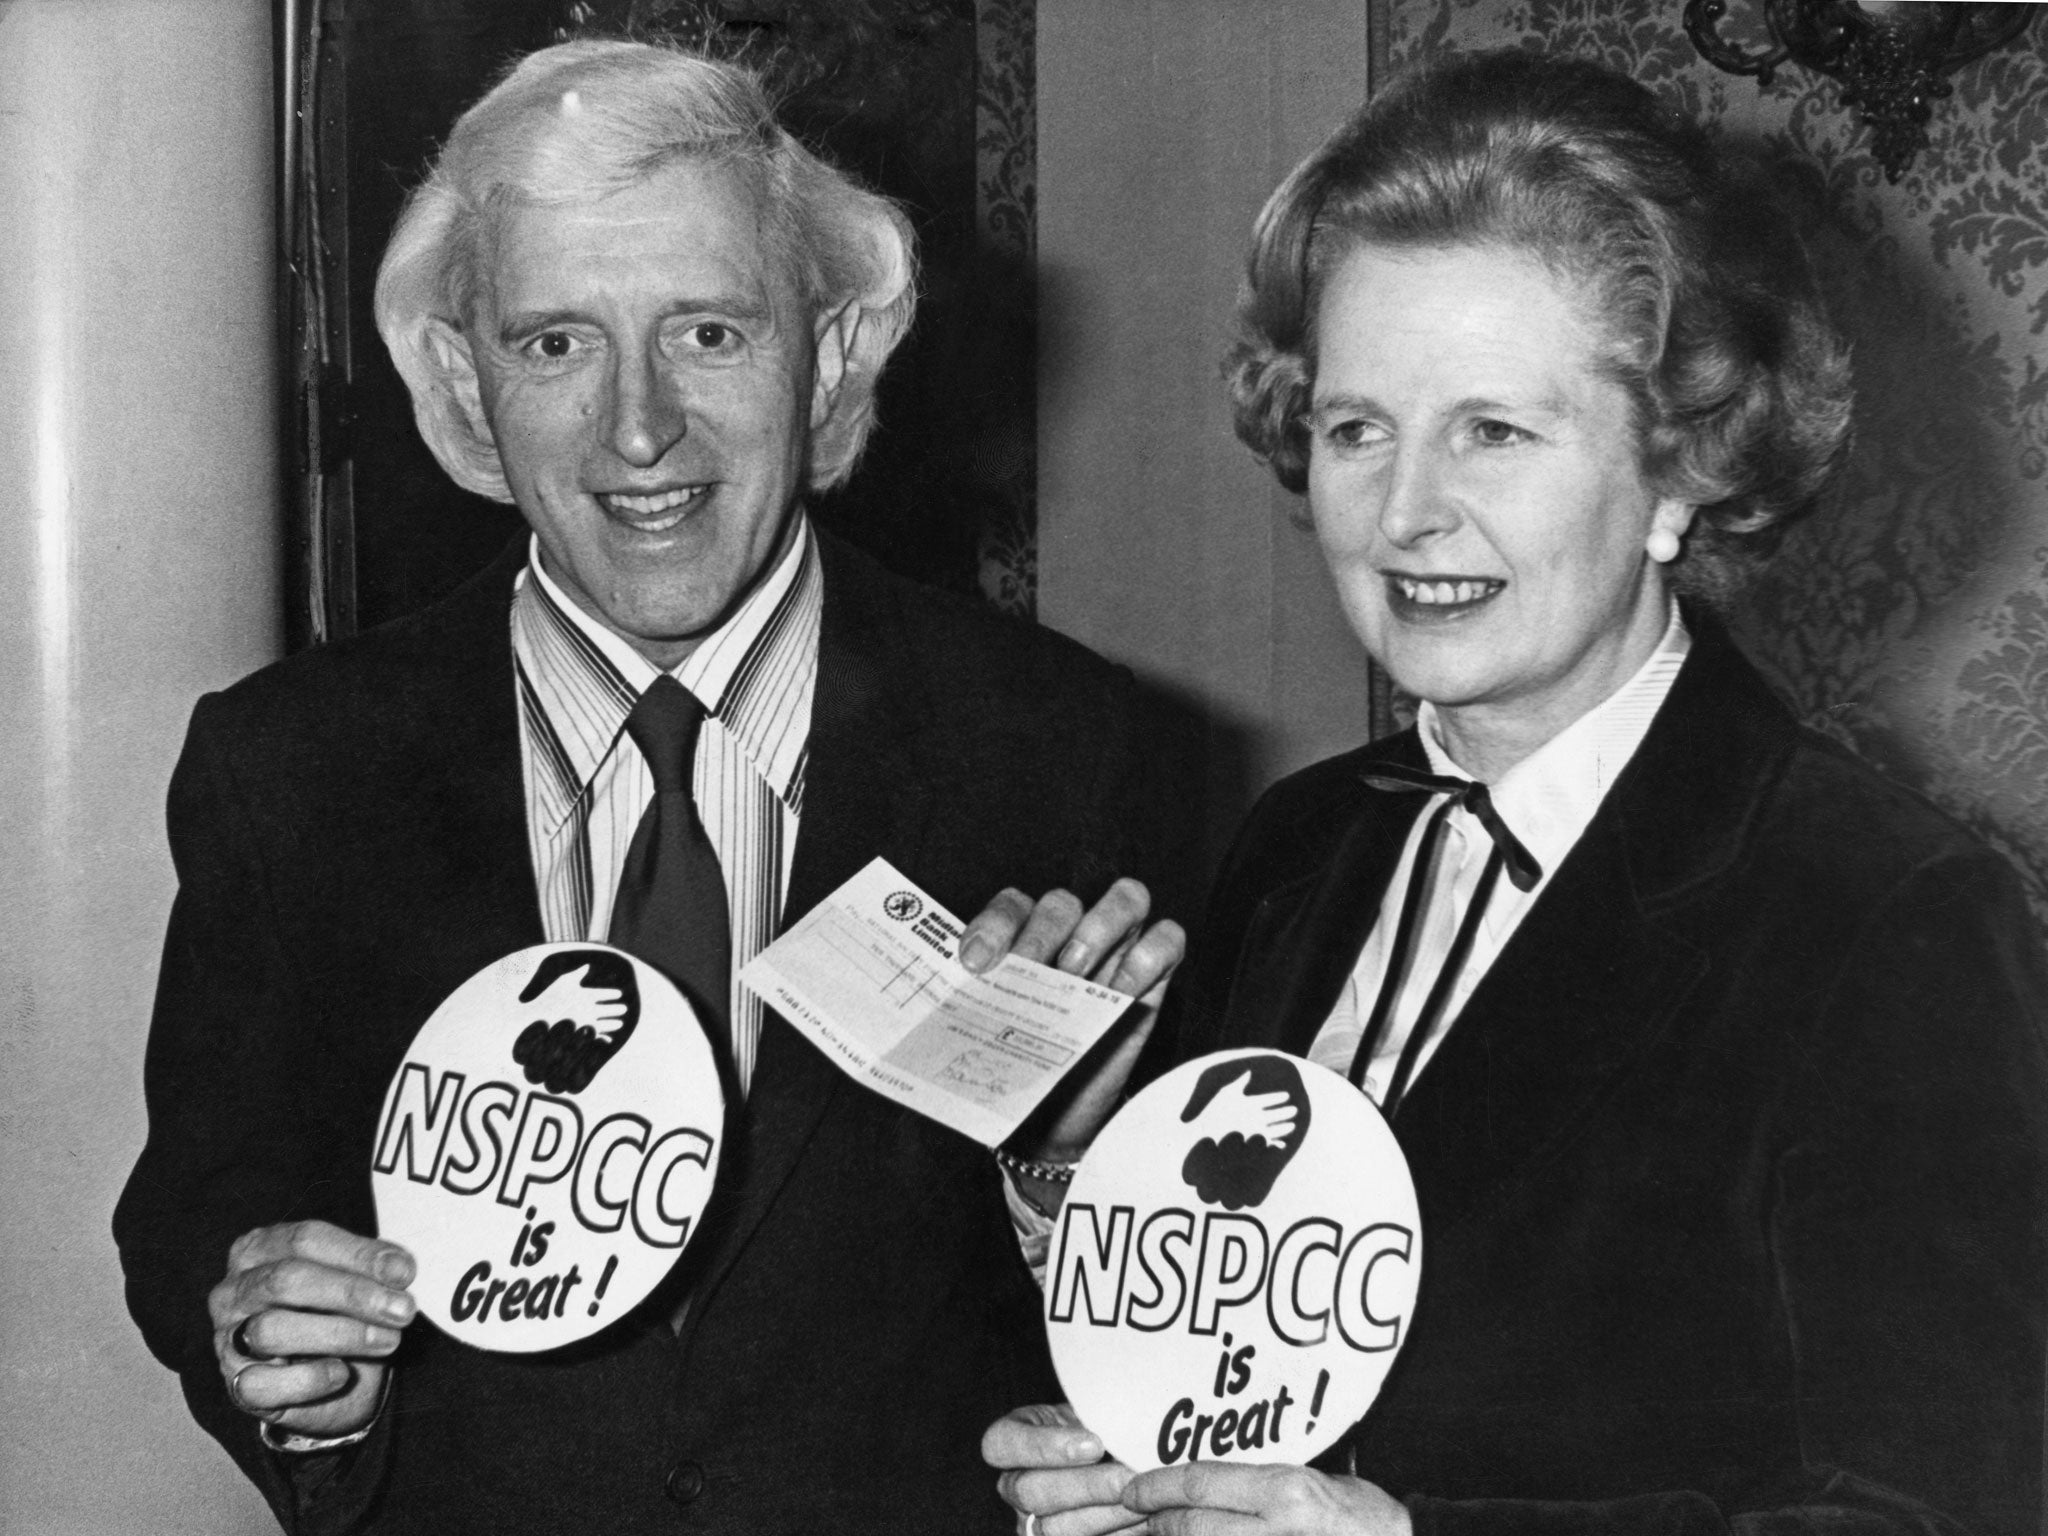 Jimmy Savile wrote to Margaret Thatcher seeking donations for Stoke Mandeville